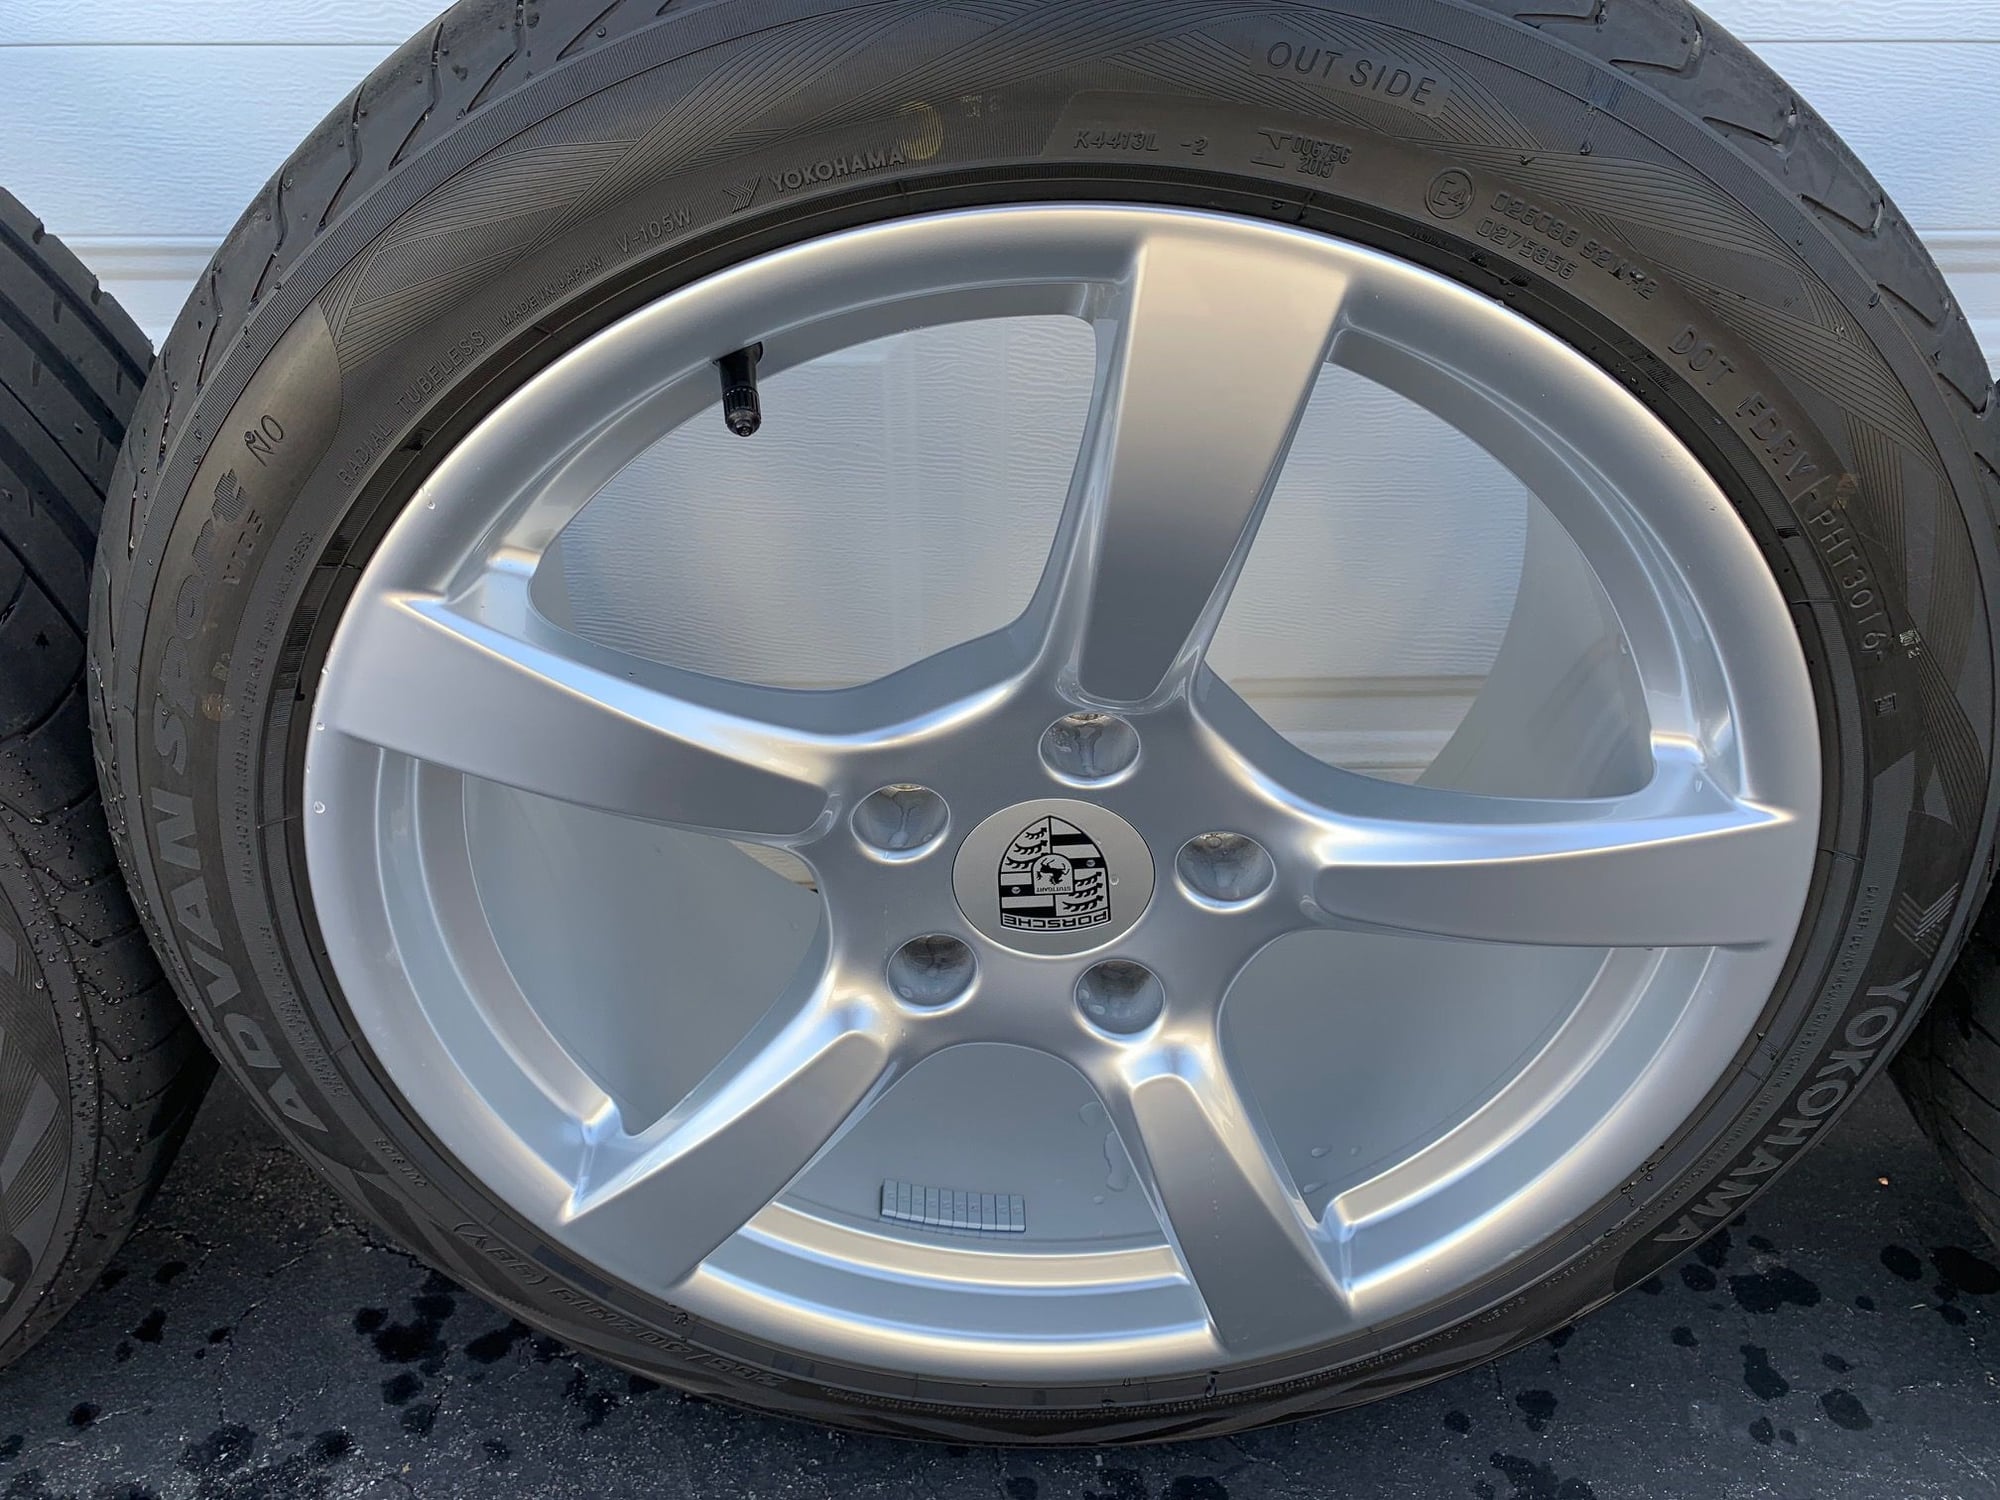 Wheels and Tires/Axles - Porsche 718 Cayman S 19" Wheels and Tires - 1300 miles - Used - 2013 to 2019 Porsche Boxster - 2013 to 2019 Porsche Cayman - San Clemente, CA 92673, United States